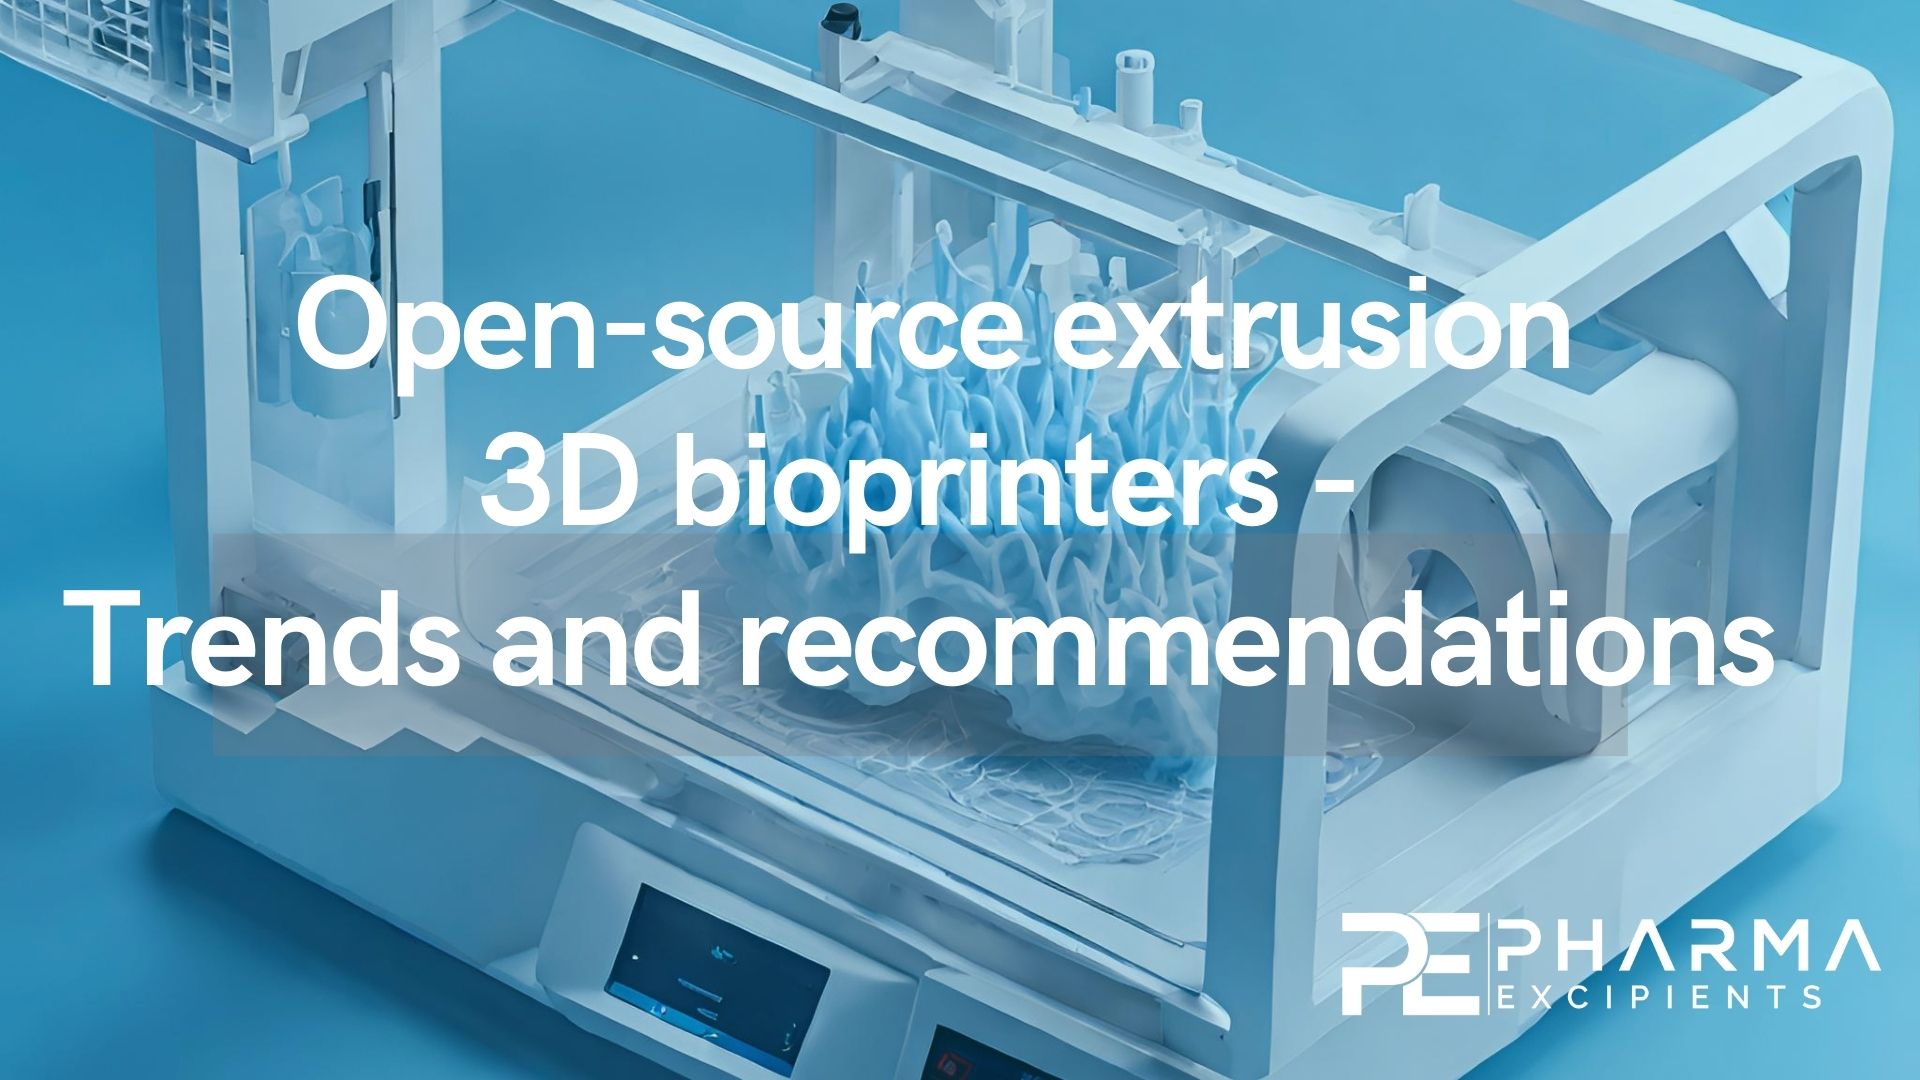 Open-source extrusion 3D bioprinters - Trends and recommendations